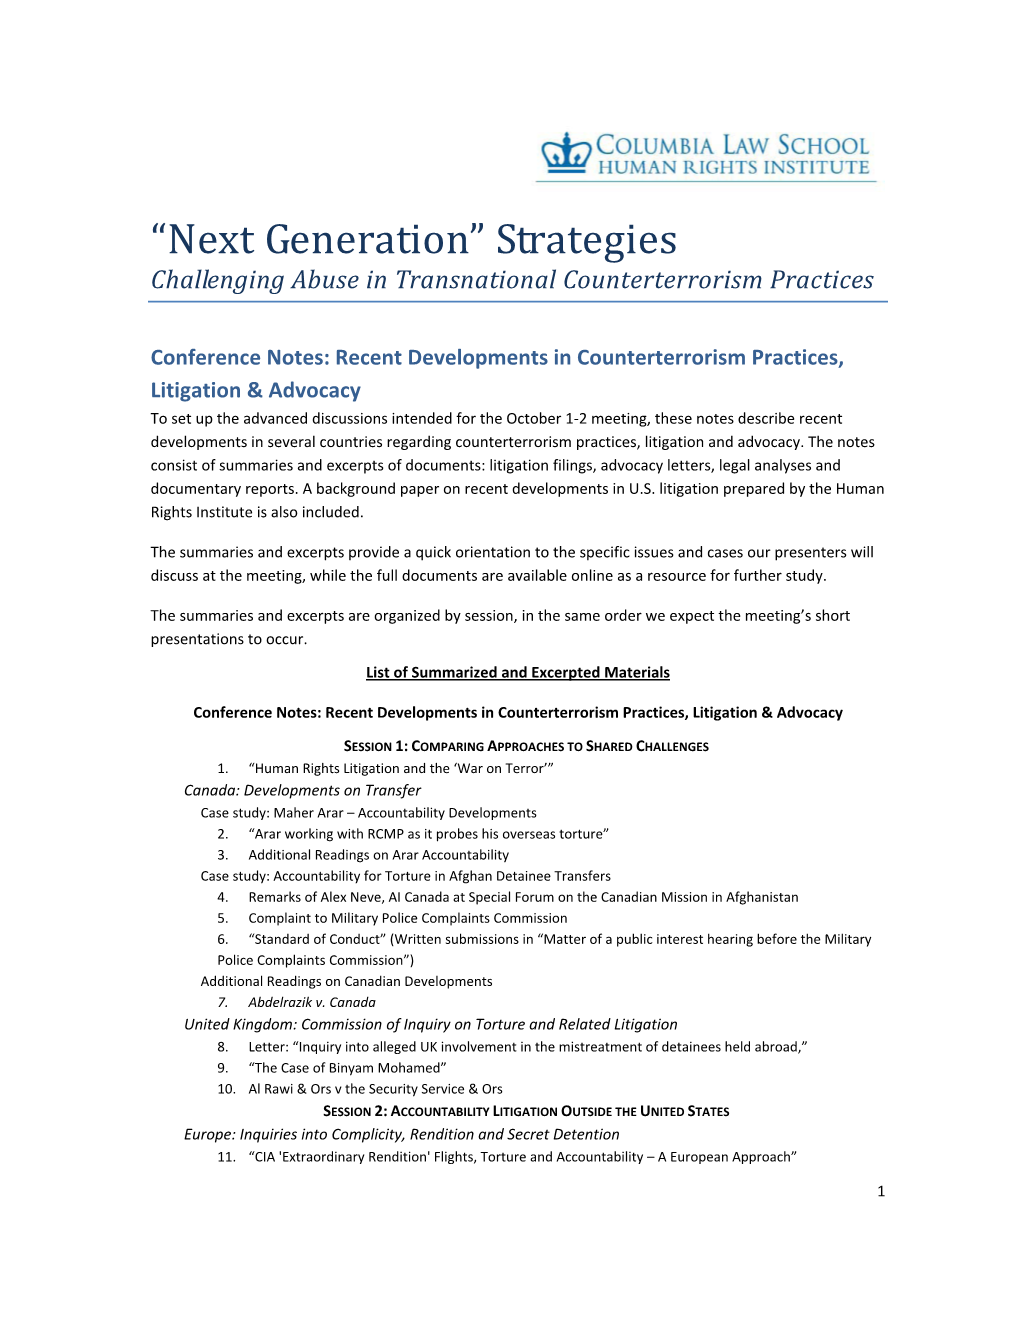 “Next Generation” Strategies Challenging Abuse in Transnational Counterterrorism Practices